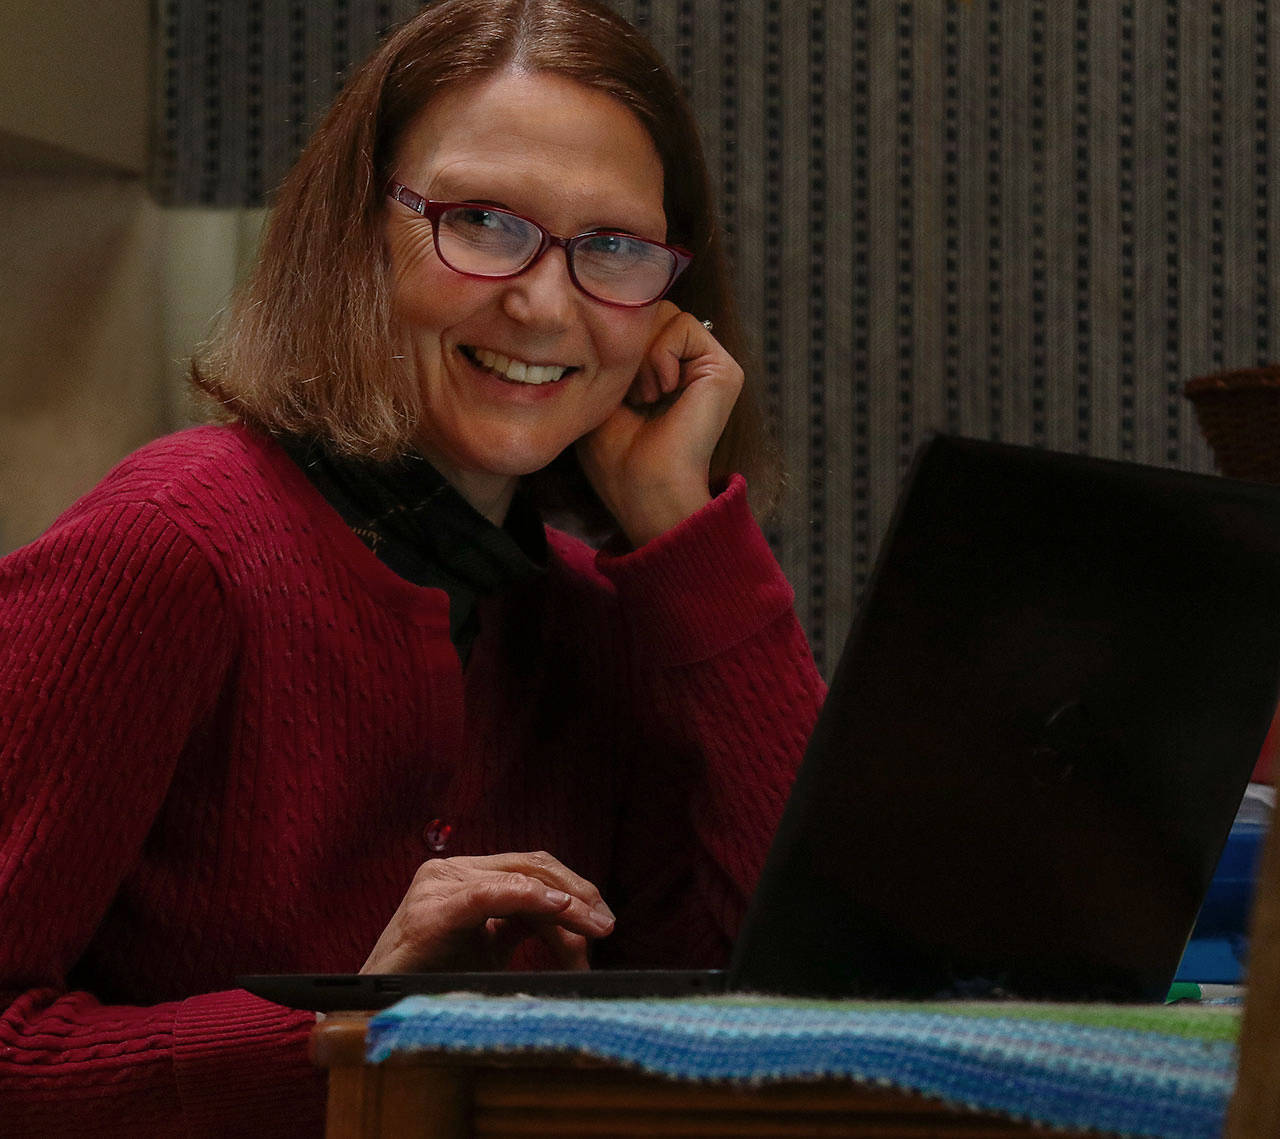 Herald columnist Julie Muhlstein appears to be happy while working at her kitchen table Tuesday, but finds that doing her job from her north Everett home has its challenges. (Dan Bates / The Herald)